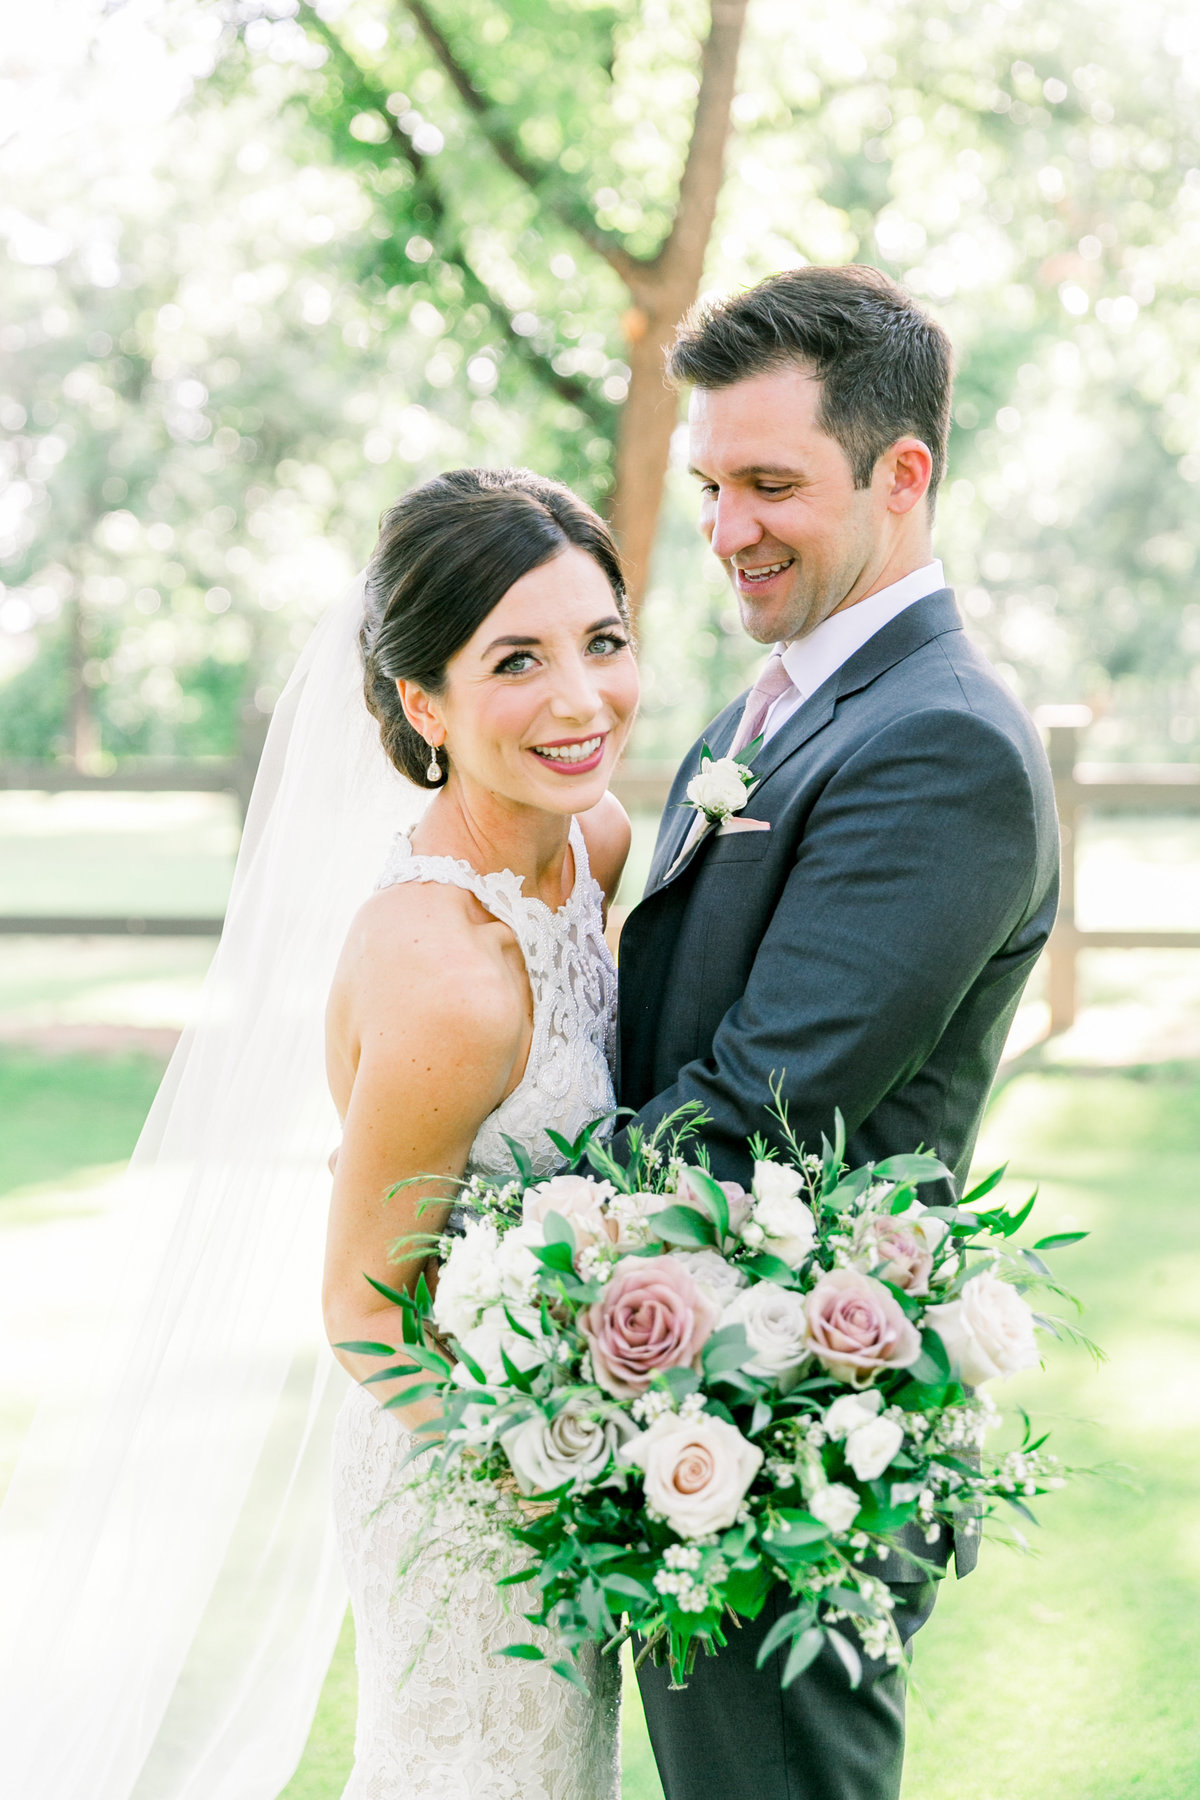 Karlie Colleen Photography - Arizona Wedding - Venue At The Grove - Maggie & Grant-446